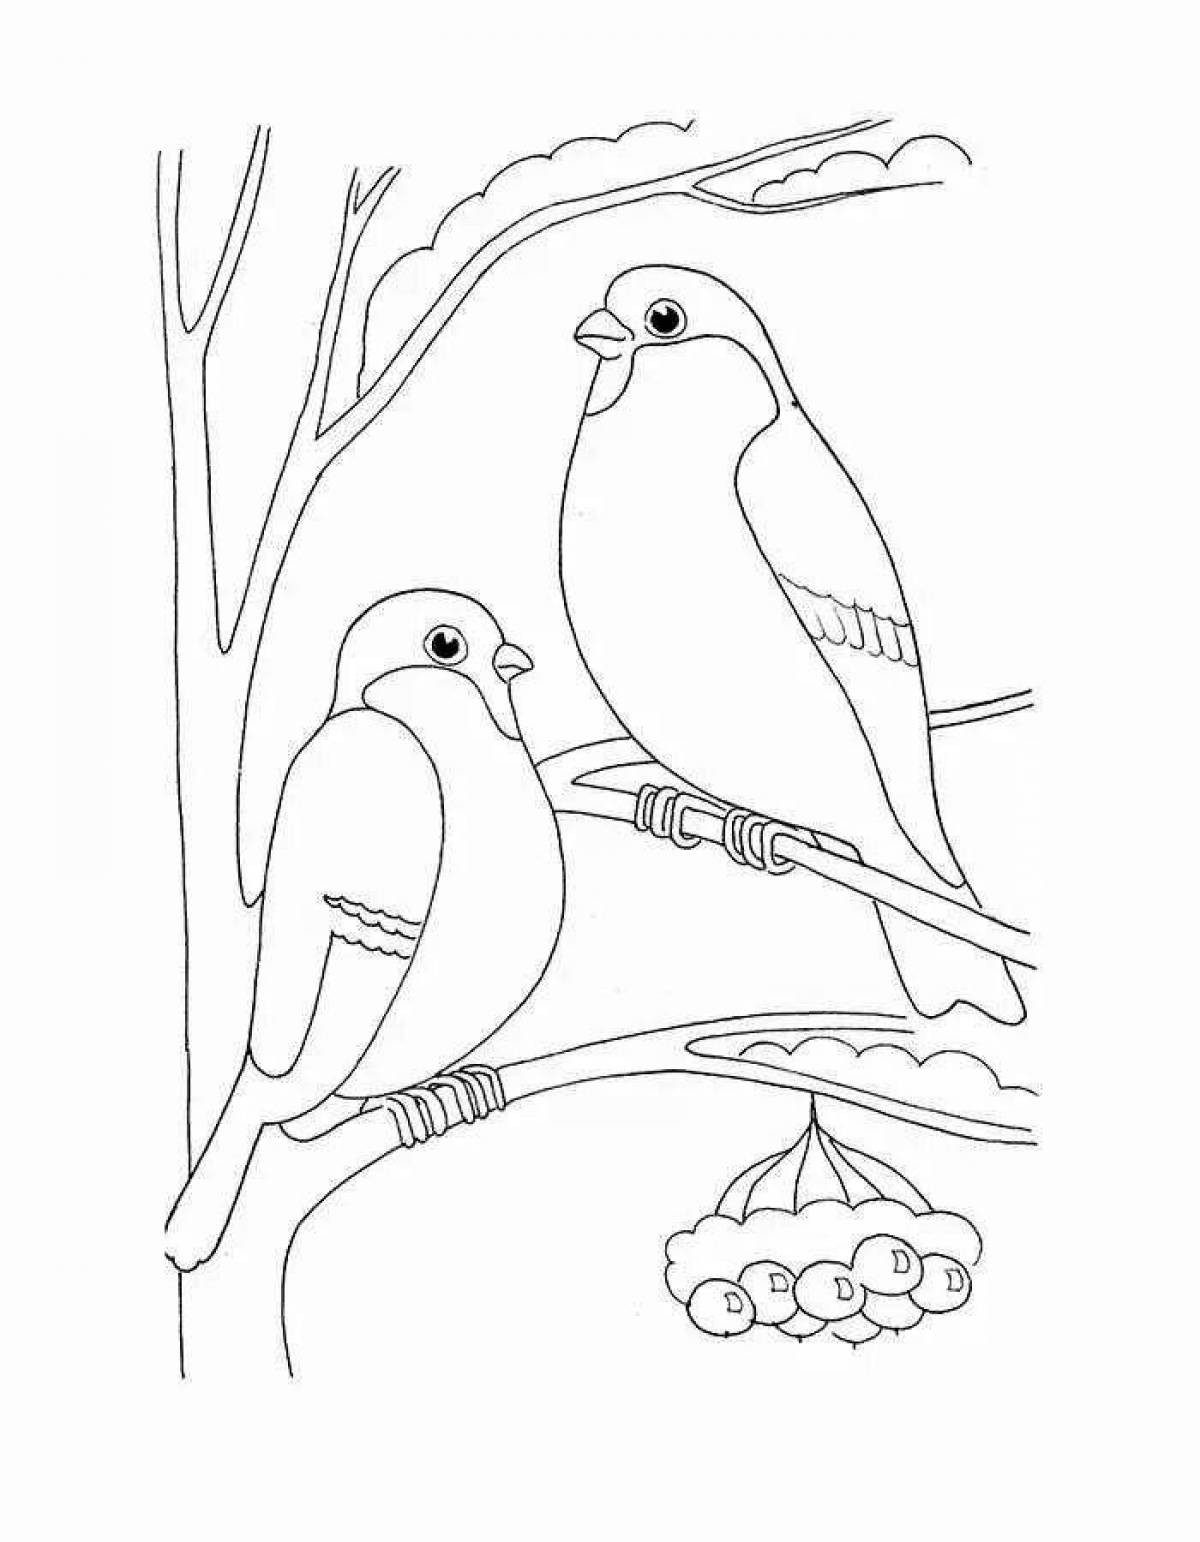 Amazing bullfinch coloring book for 2-3 year olds